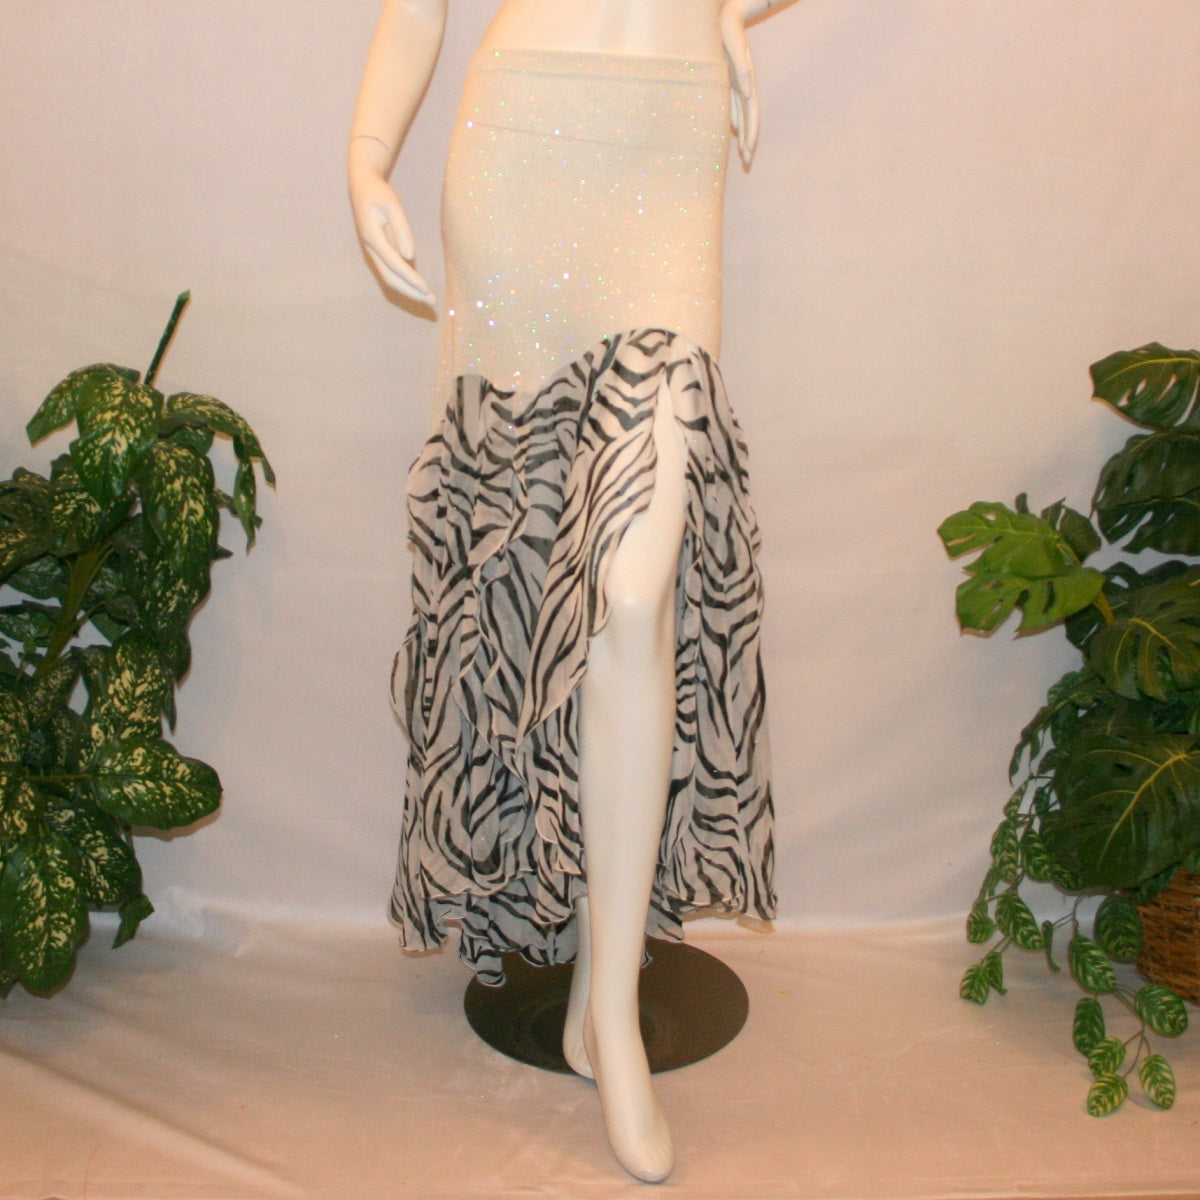 Ballroom style skirt created of white glitter slinky with yards of zebra print flowing panels will work great to create a converta ballroom dress